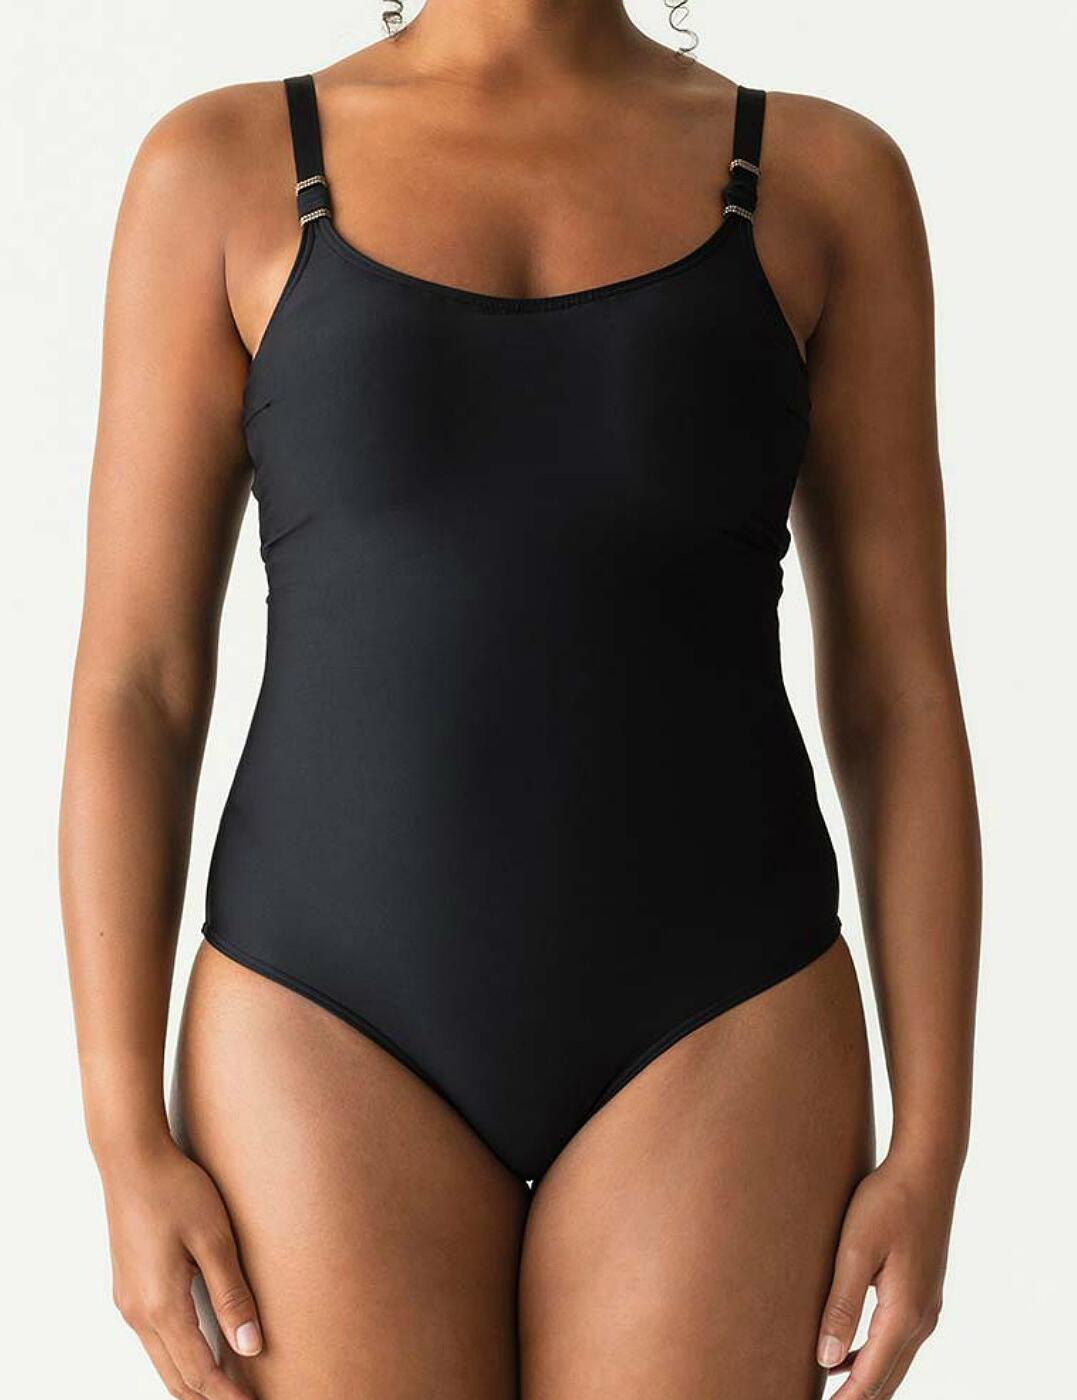 Prima Donna Cocktail Triangle Padded Swimsuit Black